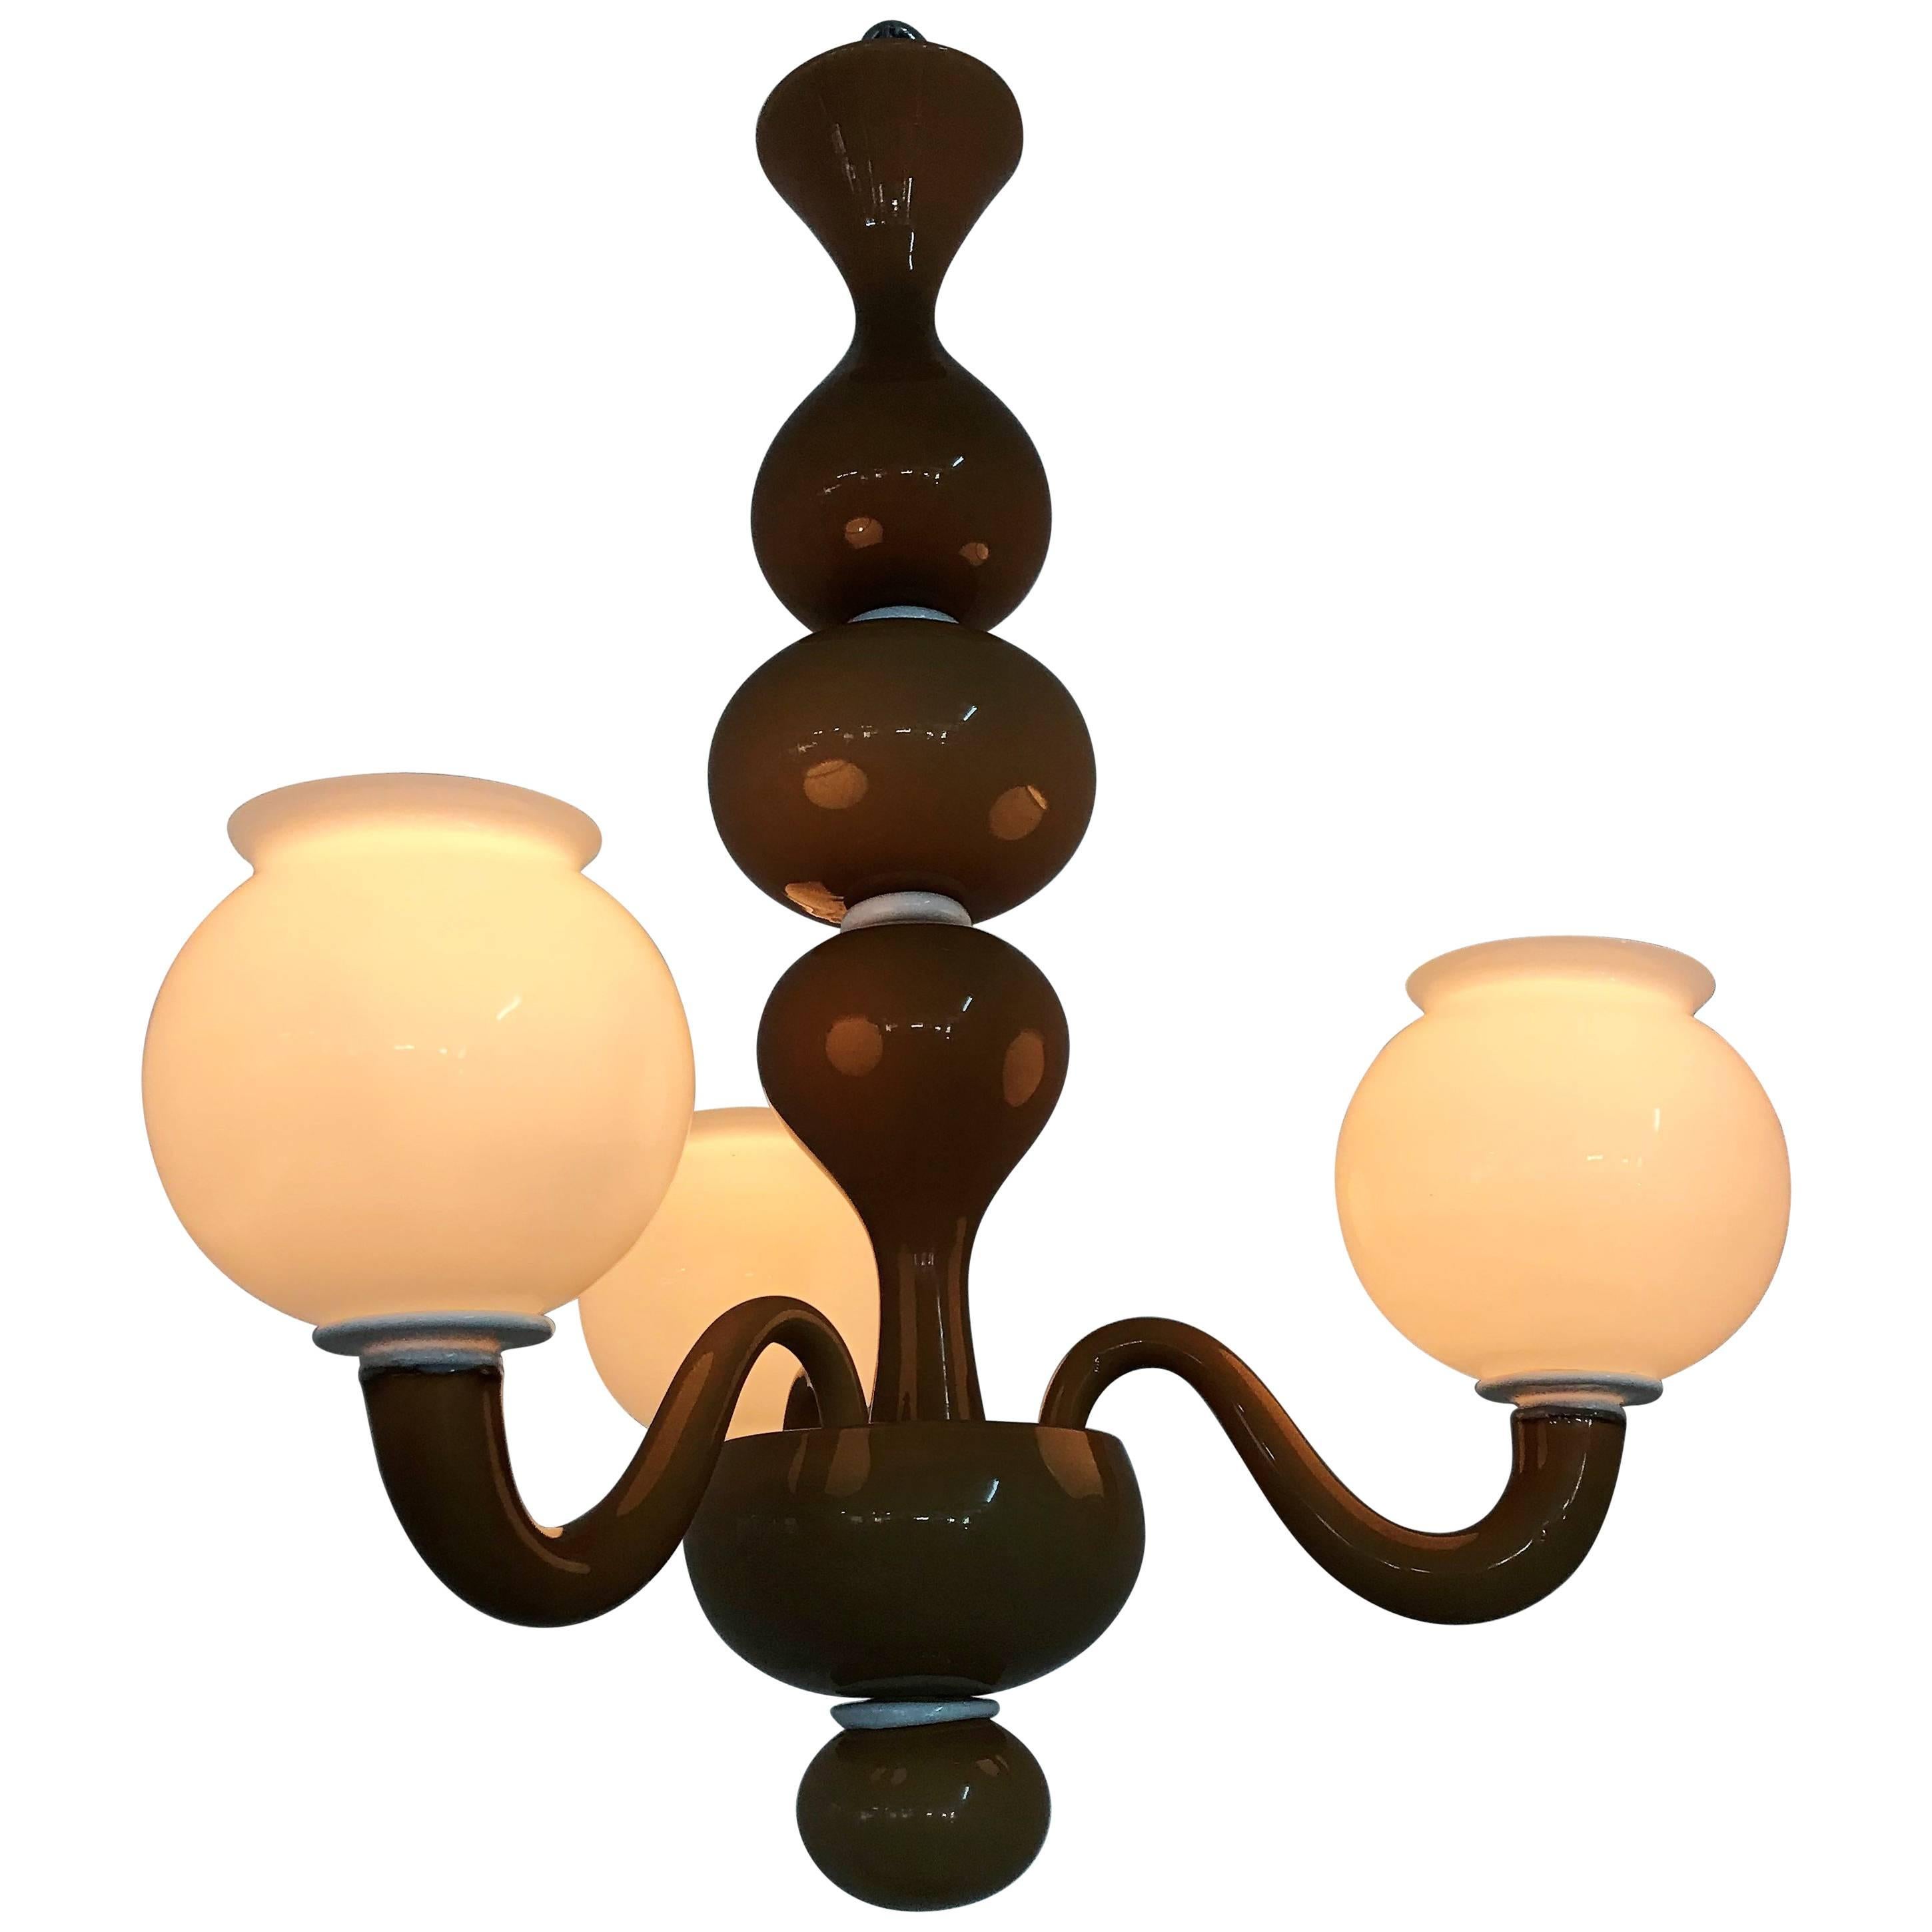 Small three-light chandelier signed by Venini in a dark, near-solid, amber/brown Lattimo Murano glass in Art deco style, circa 1930-1940.
Designed by the famous Italian Arquitect Gio Ponti.
This model has a number reference in Venini's archives as